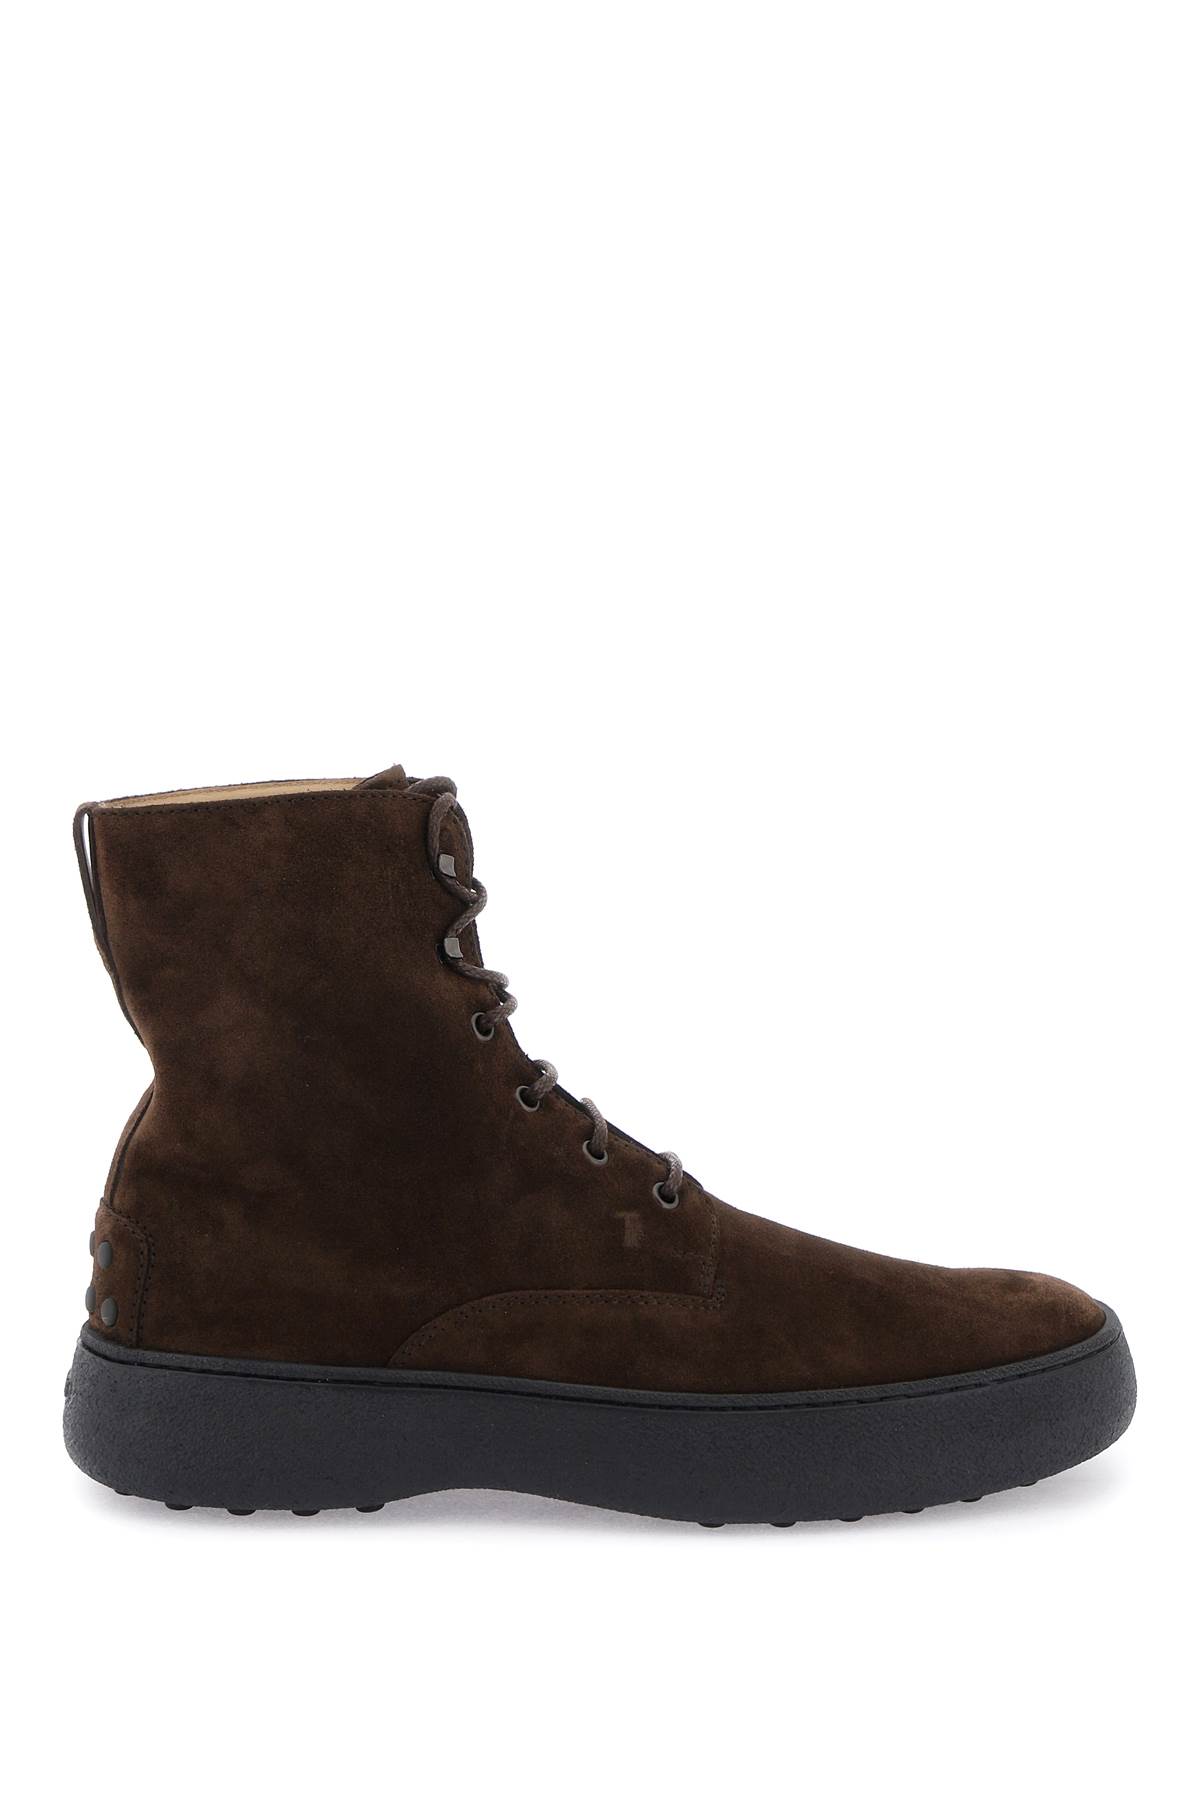 Tods W. G. Lace-up Ankle Boots In Suede